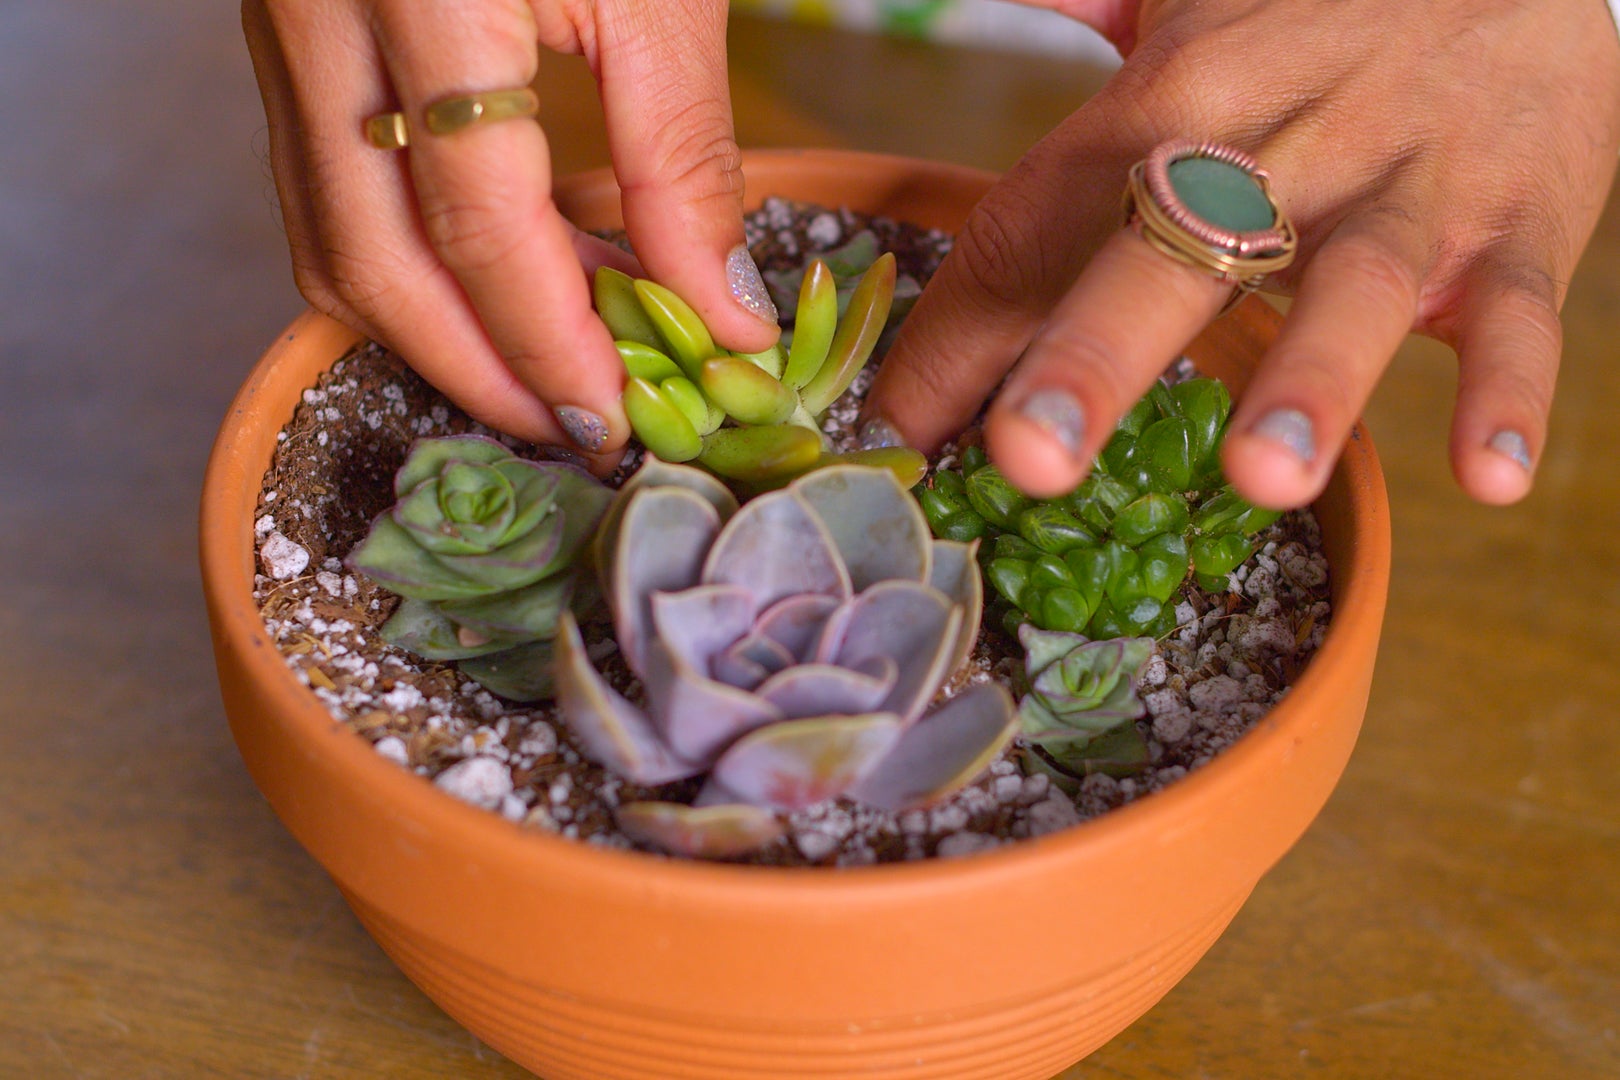 The 3 Tips Plant Kween Wants You to Take Away From Their New Succulent Garden Workshop